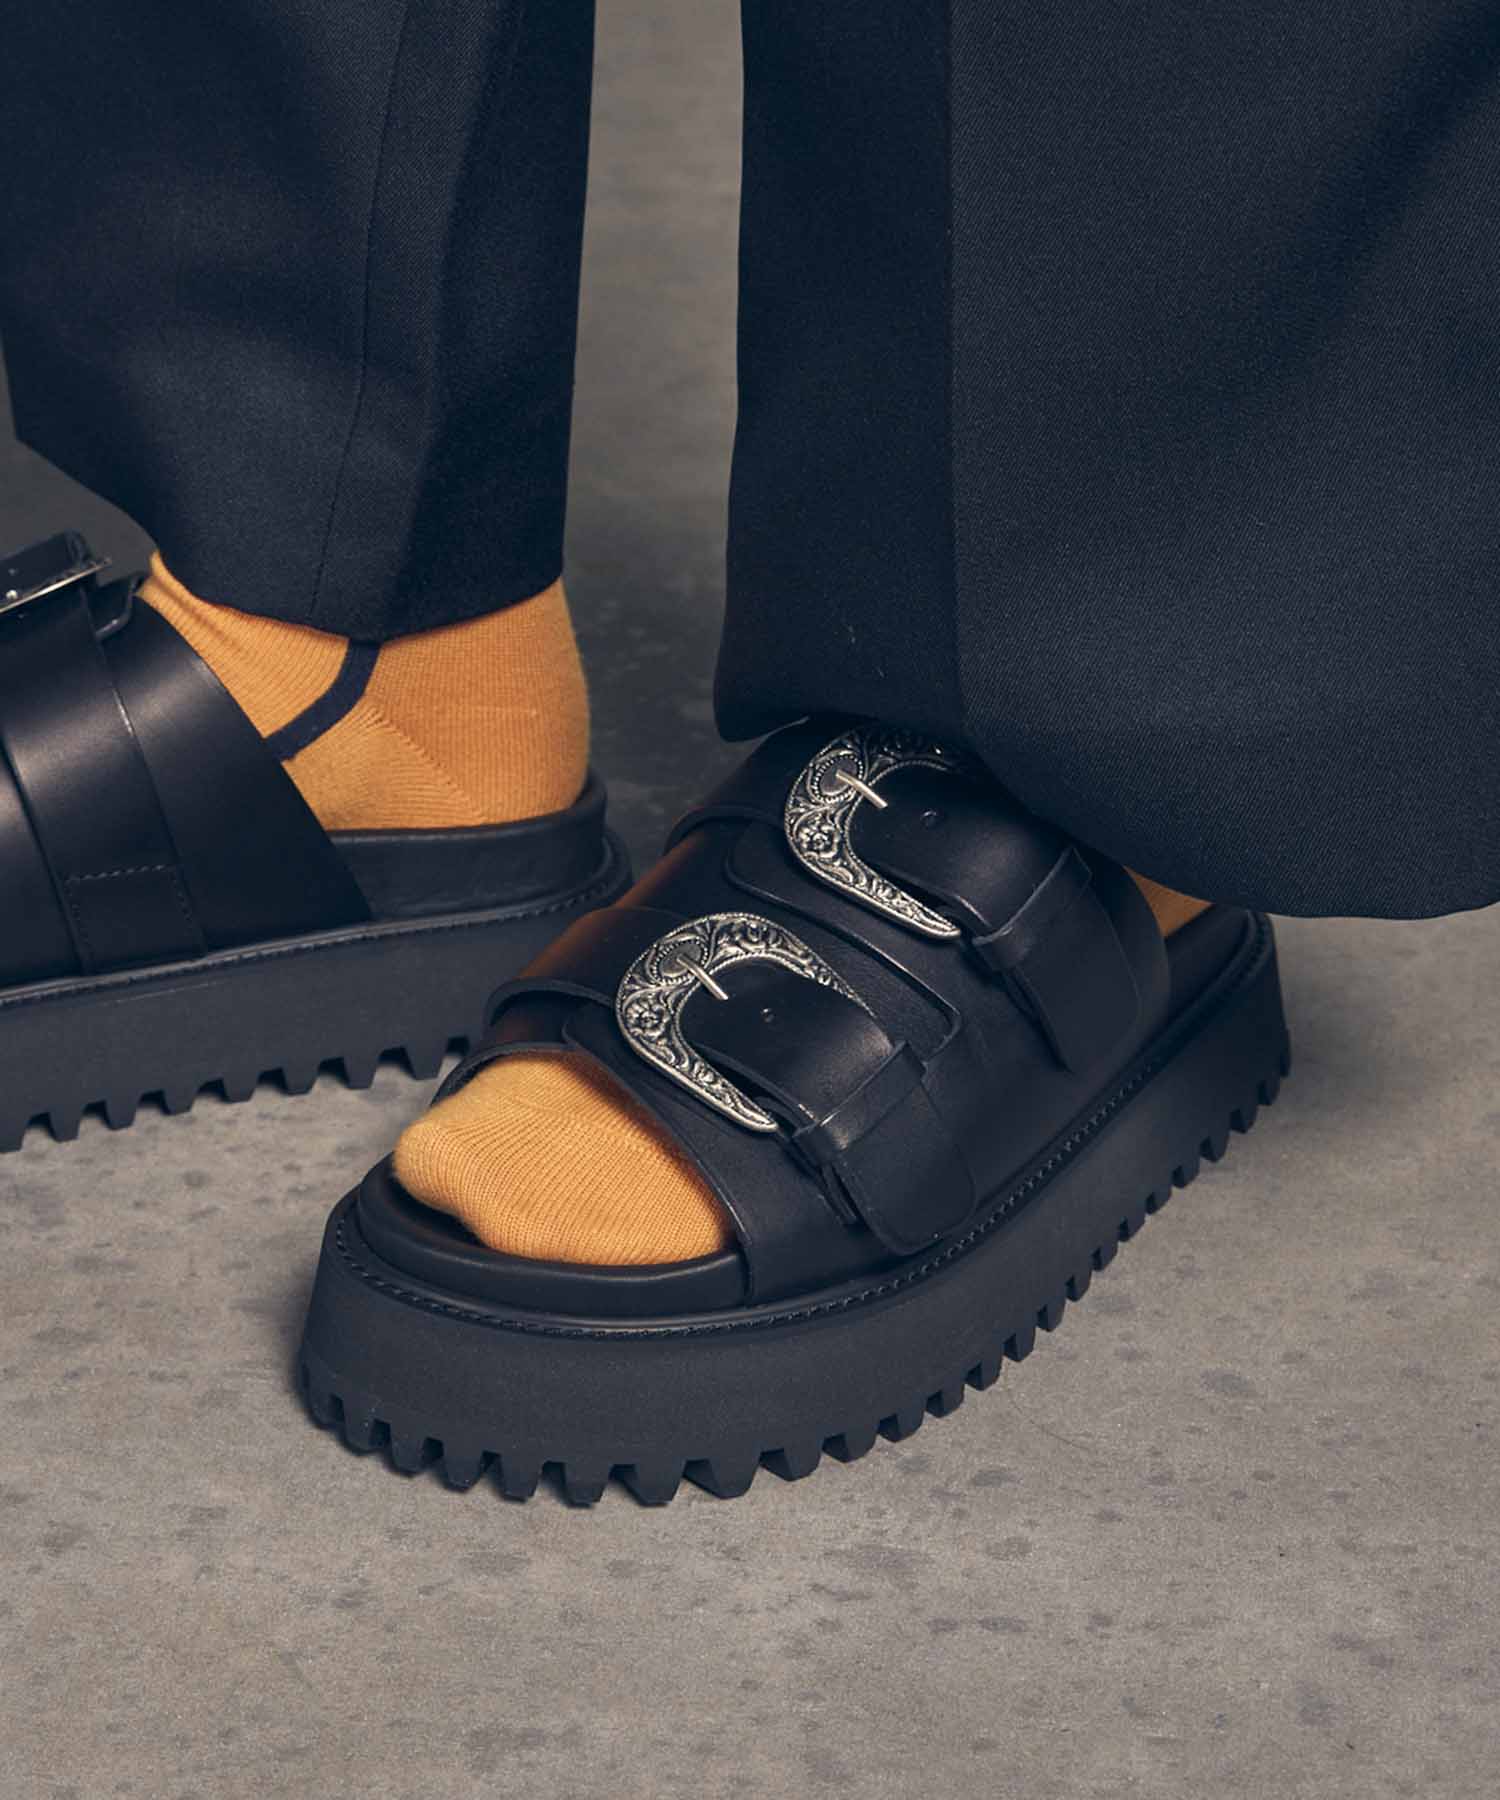 【SALE】【SPECIAL SHOES FACTORY COLLABORATION】Italian Vibram Sole Double Monk  Buckle Sandal Made In TOKYO